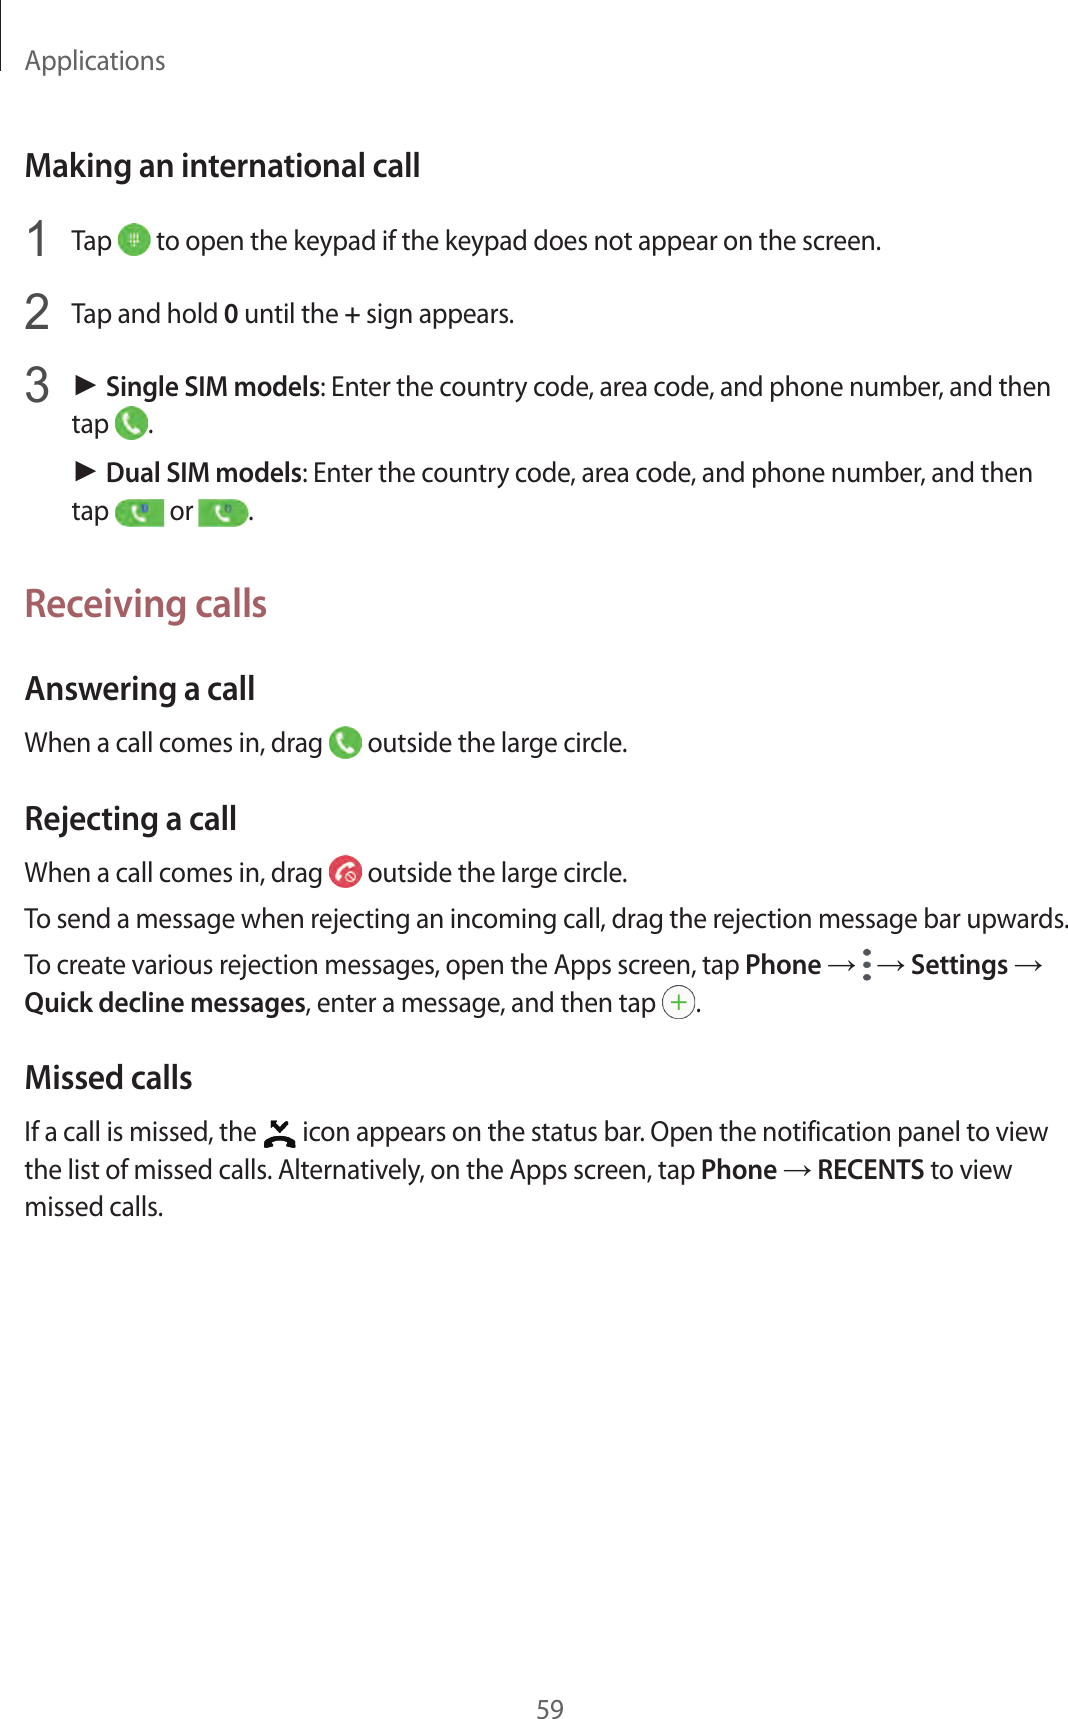 Applications59Making an international call1  Tap   to open the keypad if the keypad does not appear on the screen.2  Tap and hold 0 until the + sign appears.3 ► Single SIM models: Enter the country code, area code, and phone number, and then tap  .► Dual SIM models: Enter the country code, area code, and phone number, and then tap   or  .Receiving callsAnswering a callWhen a call comes in, drag   outside the large circle.Rejecting a callWhen a call comes in, drag   outside the large circle.To send a message when rejecting an incoming call, drag the rejection message bar upwards.To create various rejection messages, open the Apps screen, tap Phone →  → Settings → Quick decline messages, enter a message, and then tap  .Missed callsIf a call is missed, the   icon appears on the status bar. Open the notification panel to view the list of missed calls. Alternatively, on the Apps screen, tap Phone → RECENTS to view missed calls.